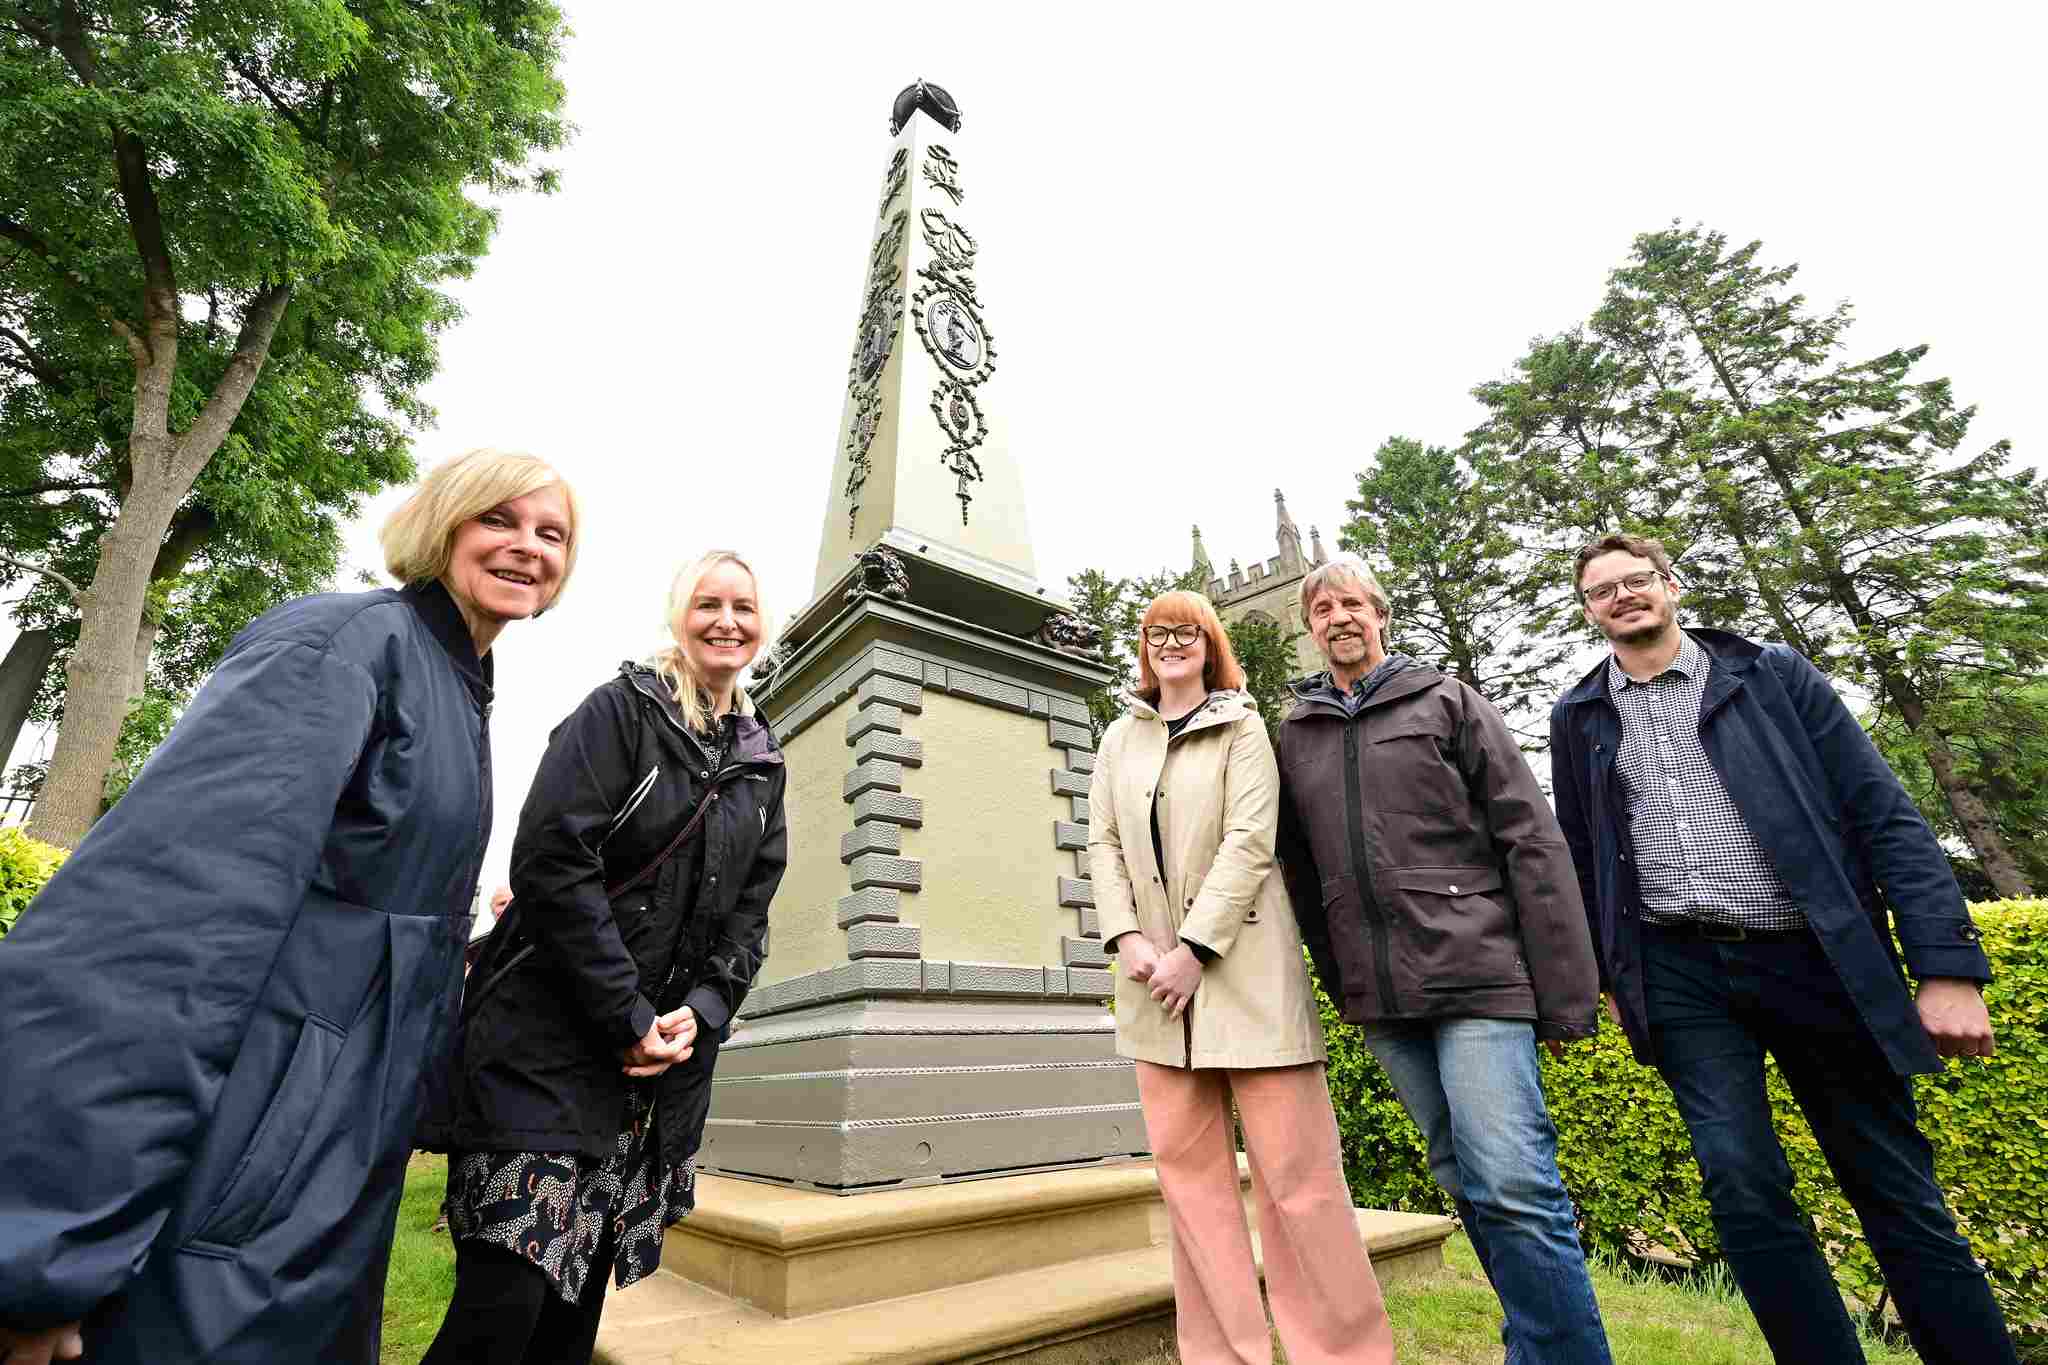 Members of project team in front of obelisk